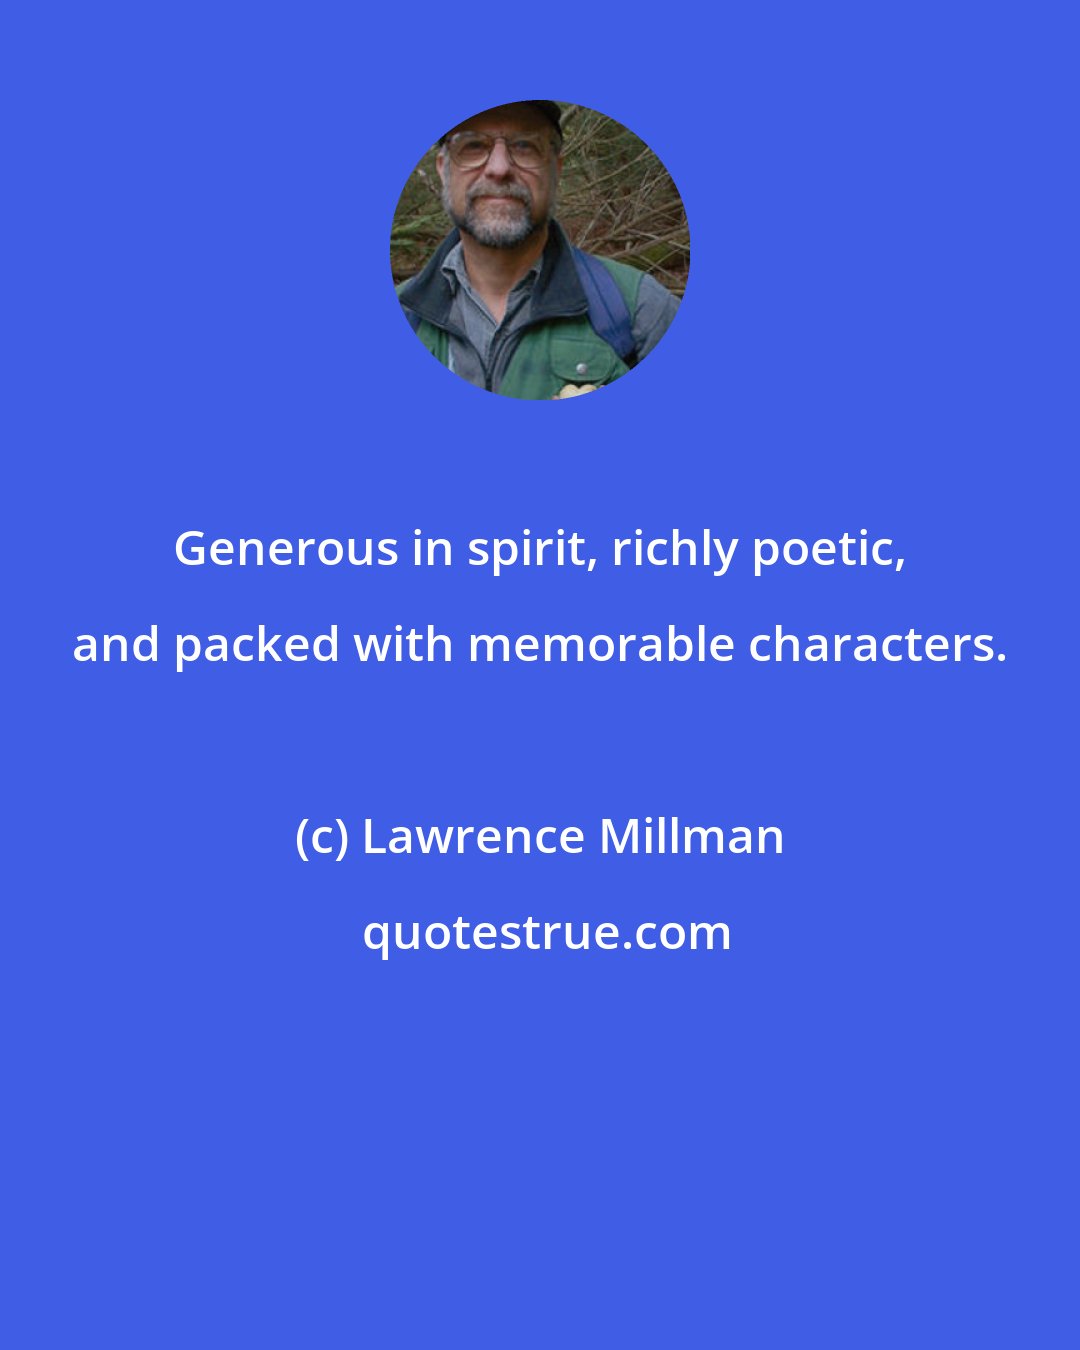 Lawrence Millman: Generous in spirit, richly poetic, and packed with memorable characters.